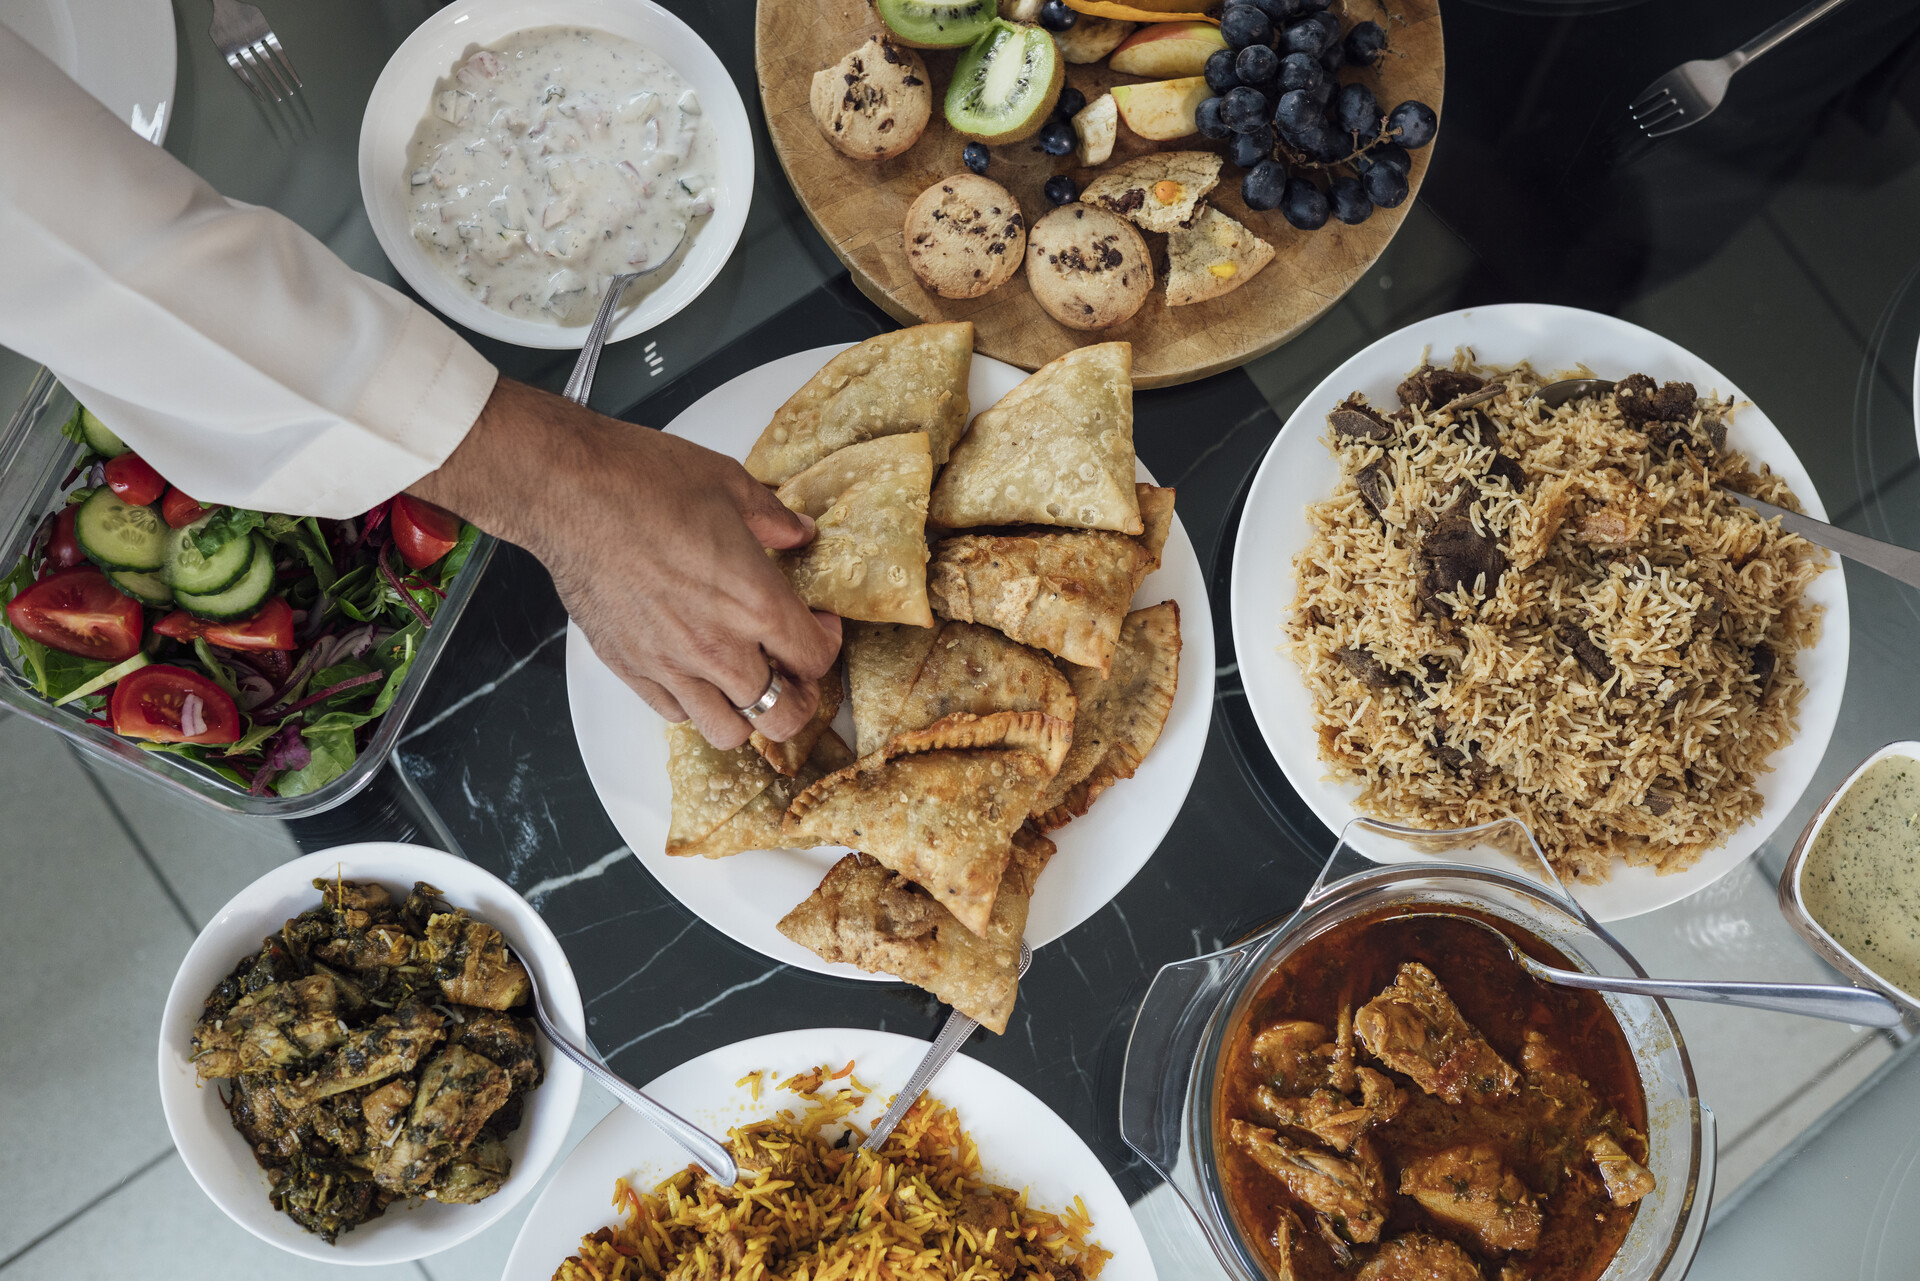 An overhead shot of a delicious-looking array of plated foods on a gray table, including samosas and curry, with a hand reaching in to take some